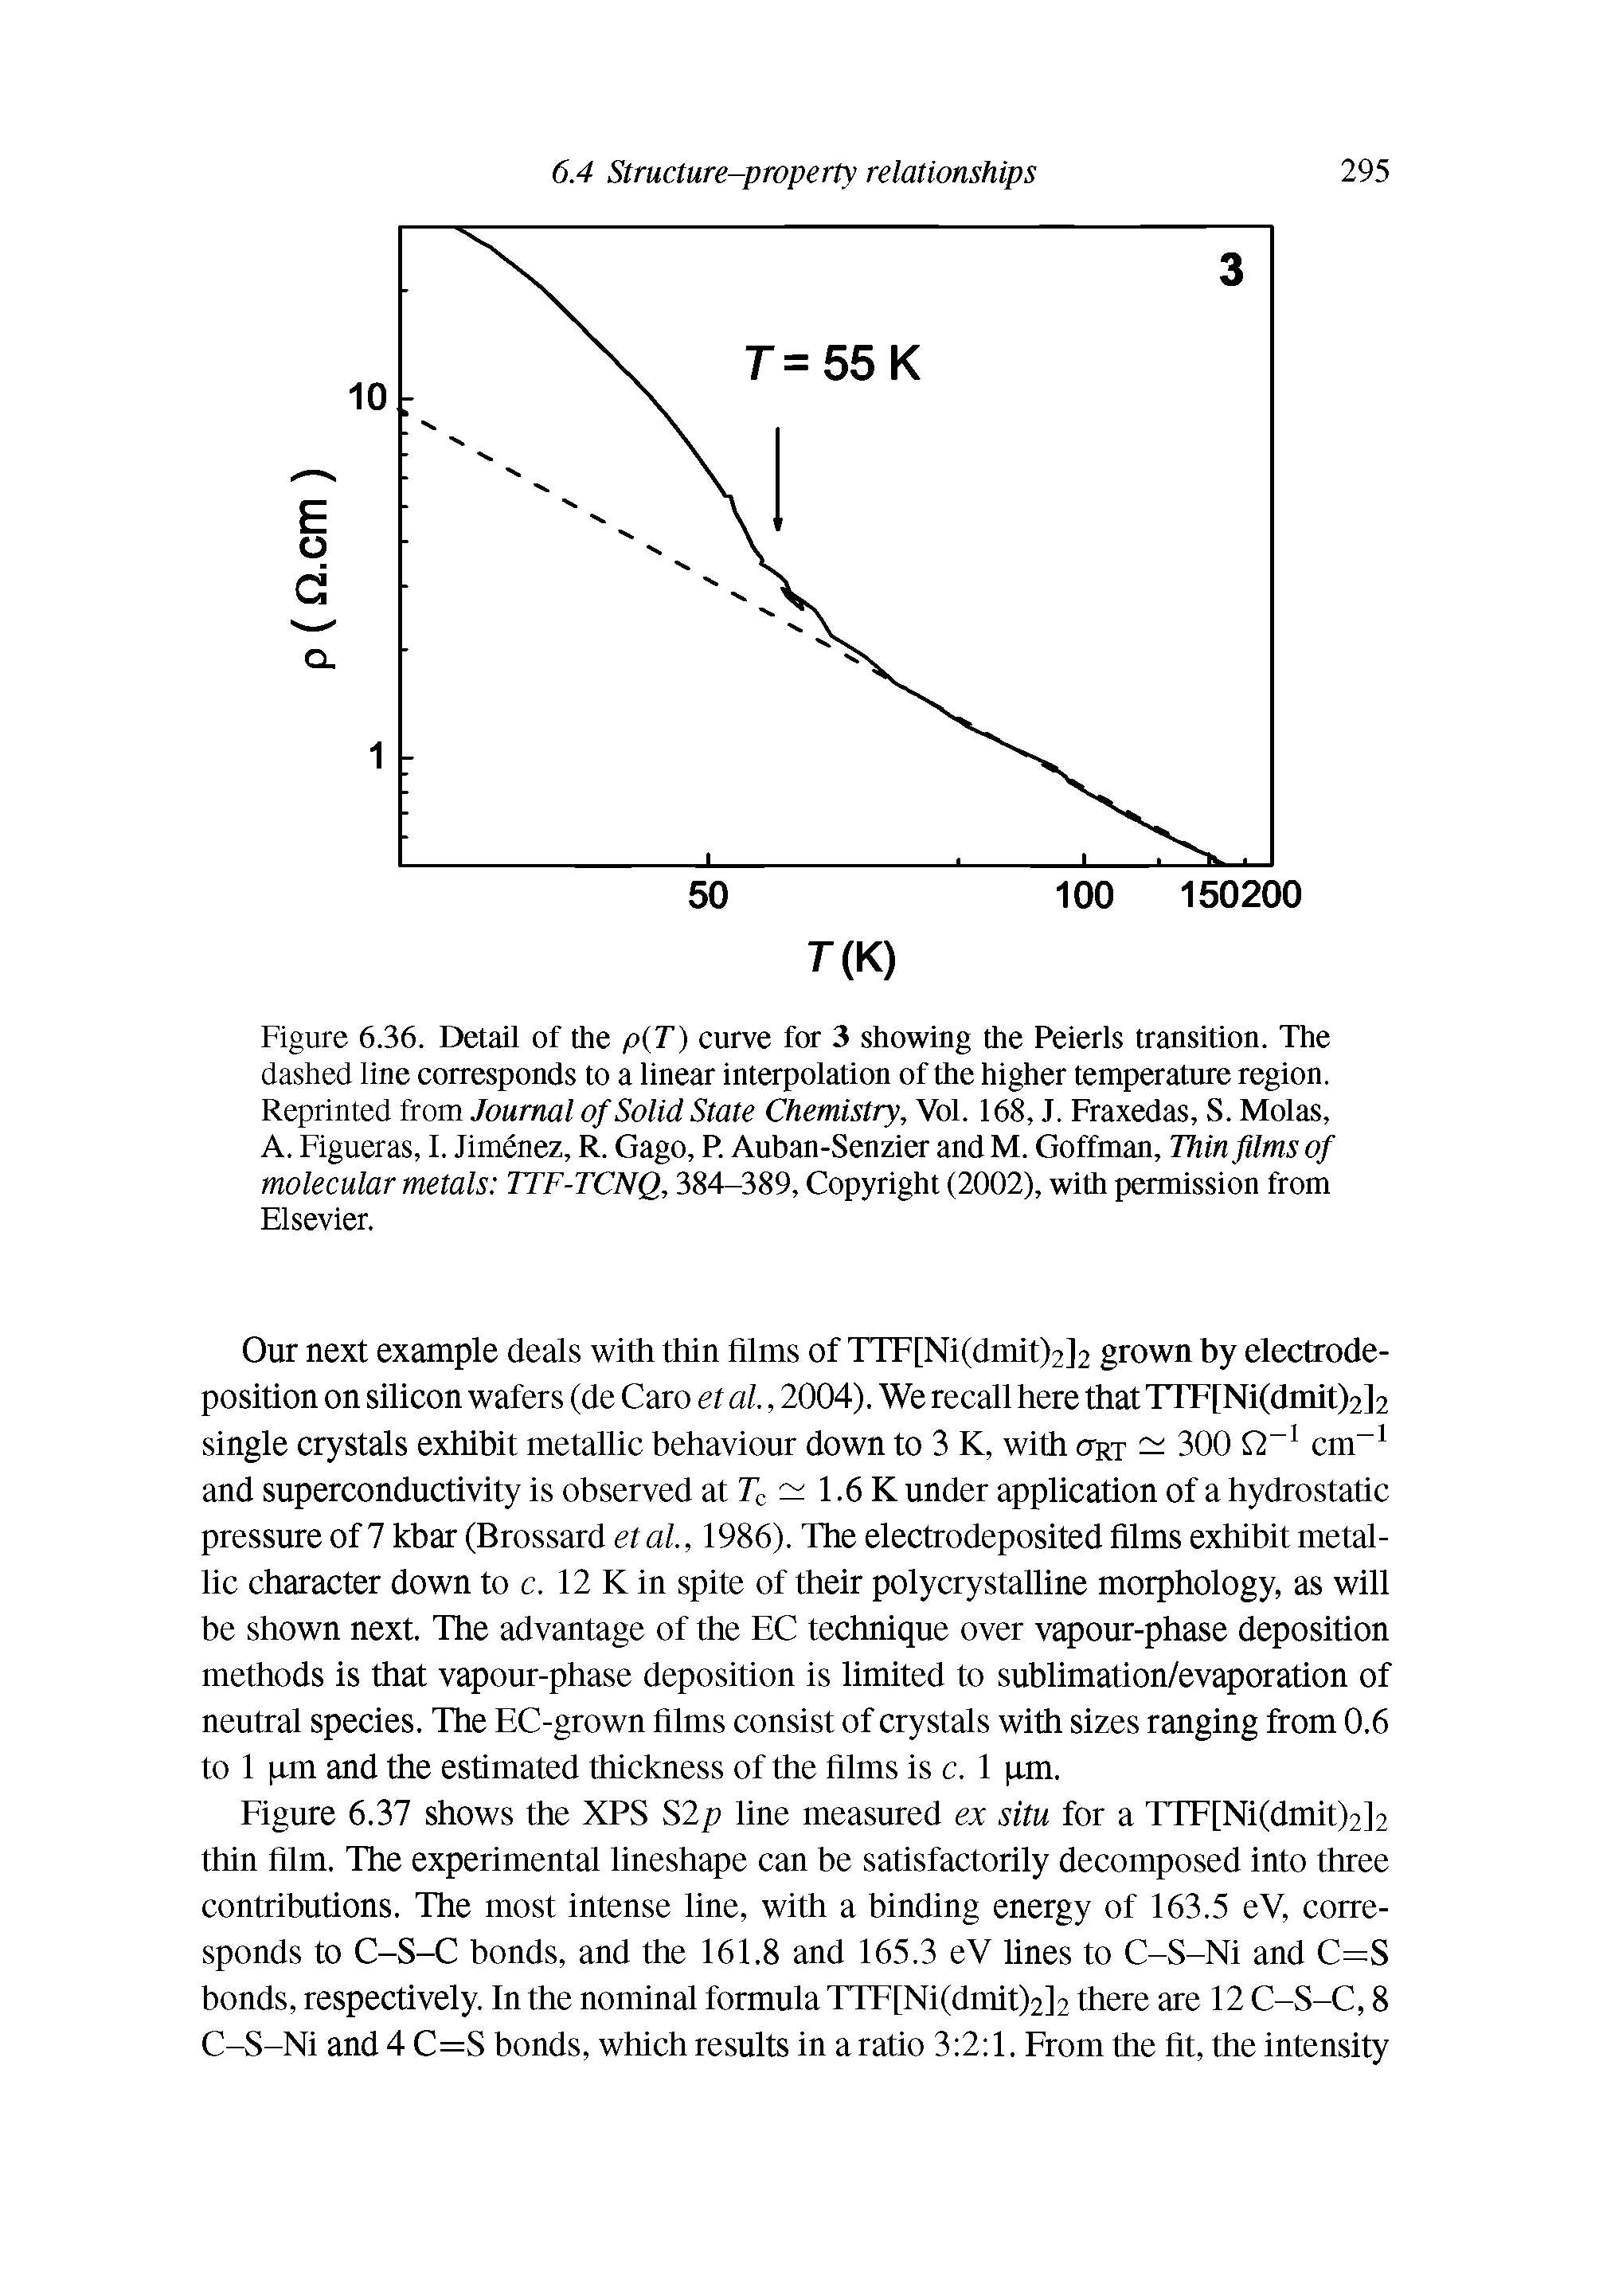 Figure 6.36. Detail of the /o(T ) curve for 3 showing the Peierls transition. The dashed line corresponds to a linear interpolation of the higher temperature region. Reprinted from Journal of Solid State Chemistry, Vol. 168, J. Fraxedas, S. Molas, A. Figueras, I. Jimenez, R. Gago, R Auban-Senzier and M. Goffman, Thin films of molecular metals TTF-TCNQ, 384-389, Copyright (2002), with permission from Elsevier.